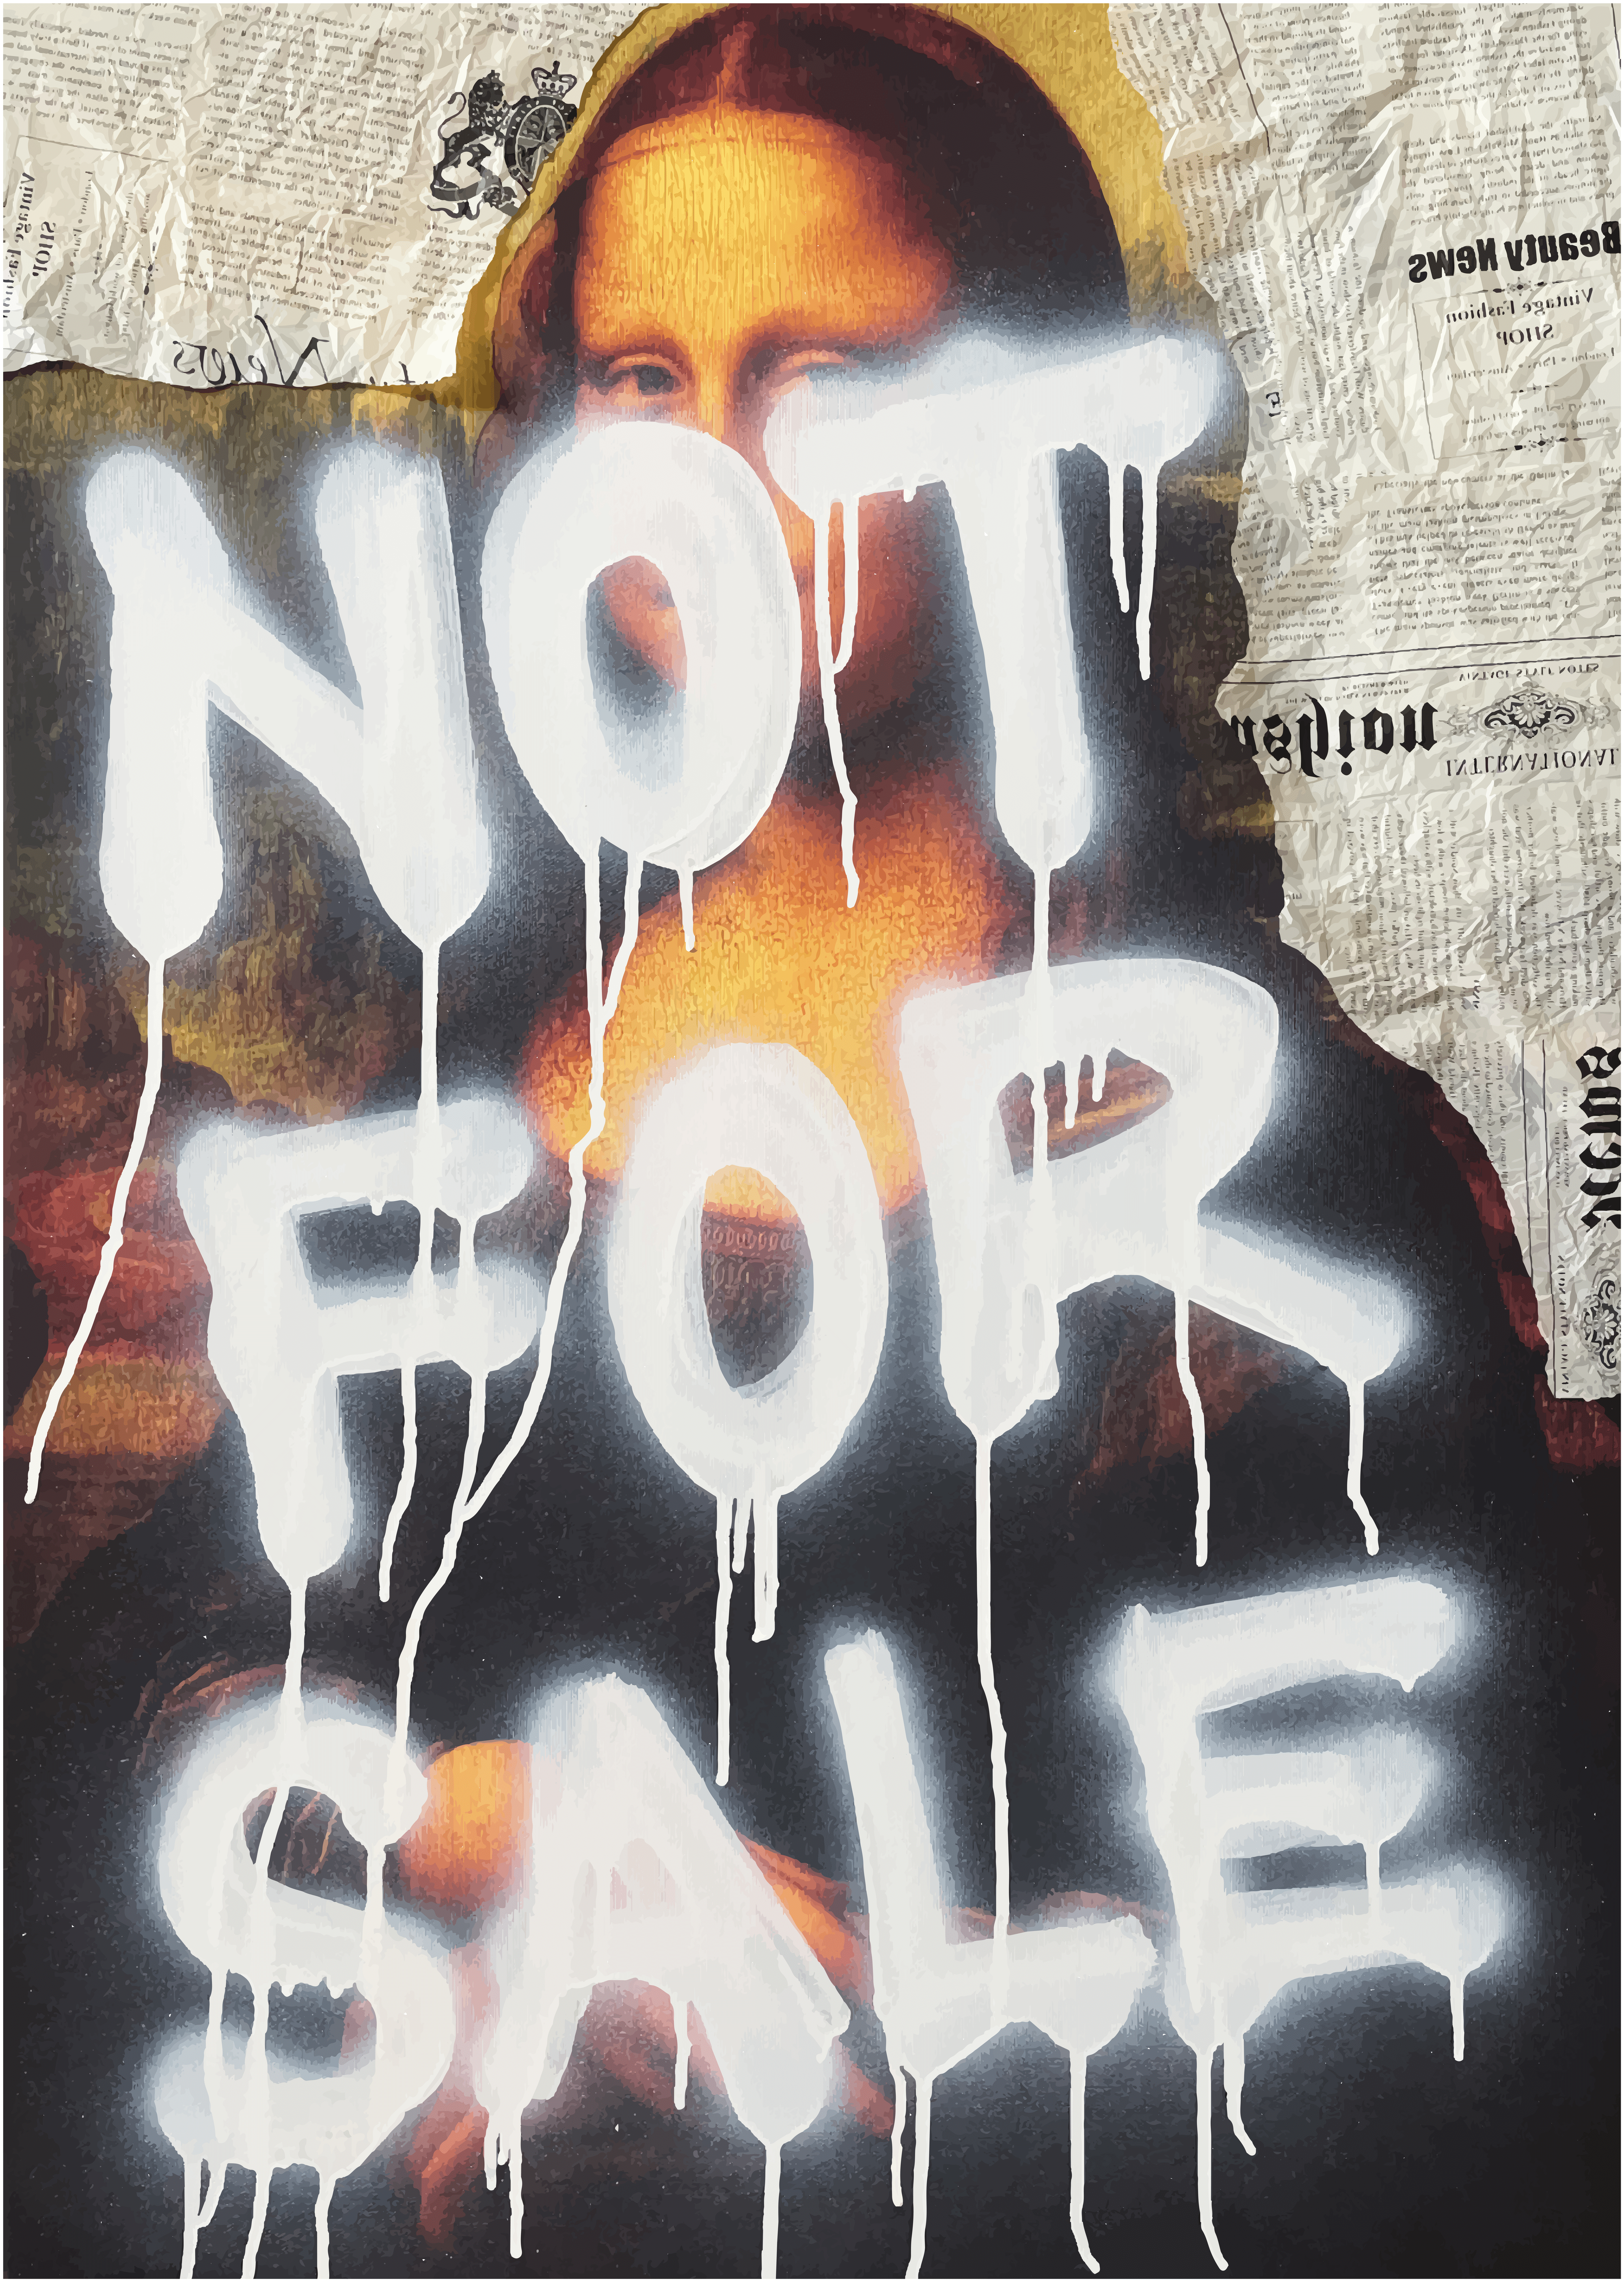 "NOT FOR SALE" by MAUII